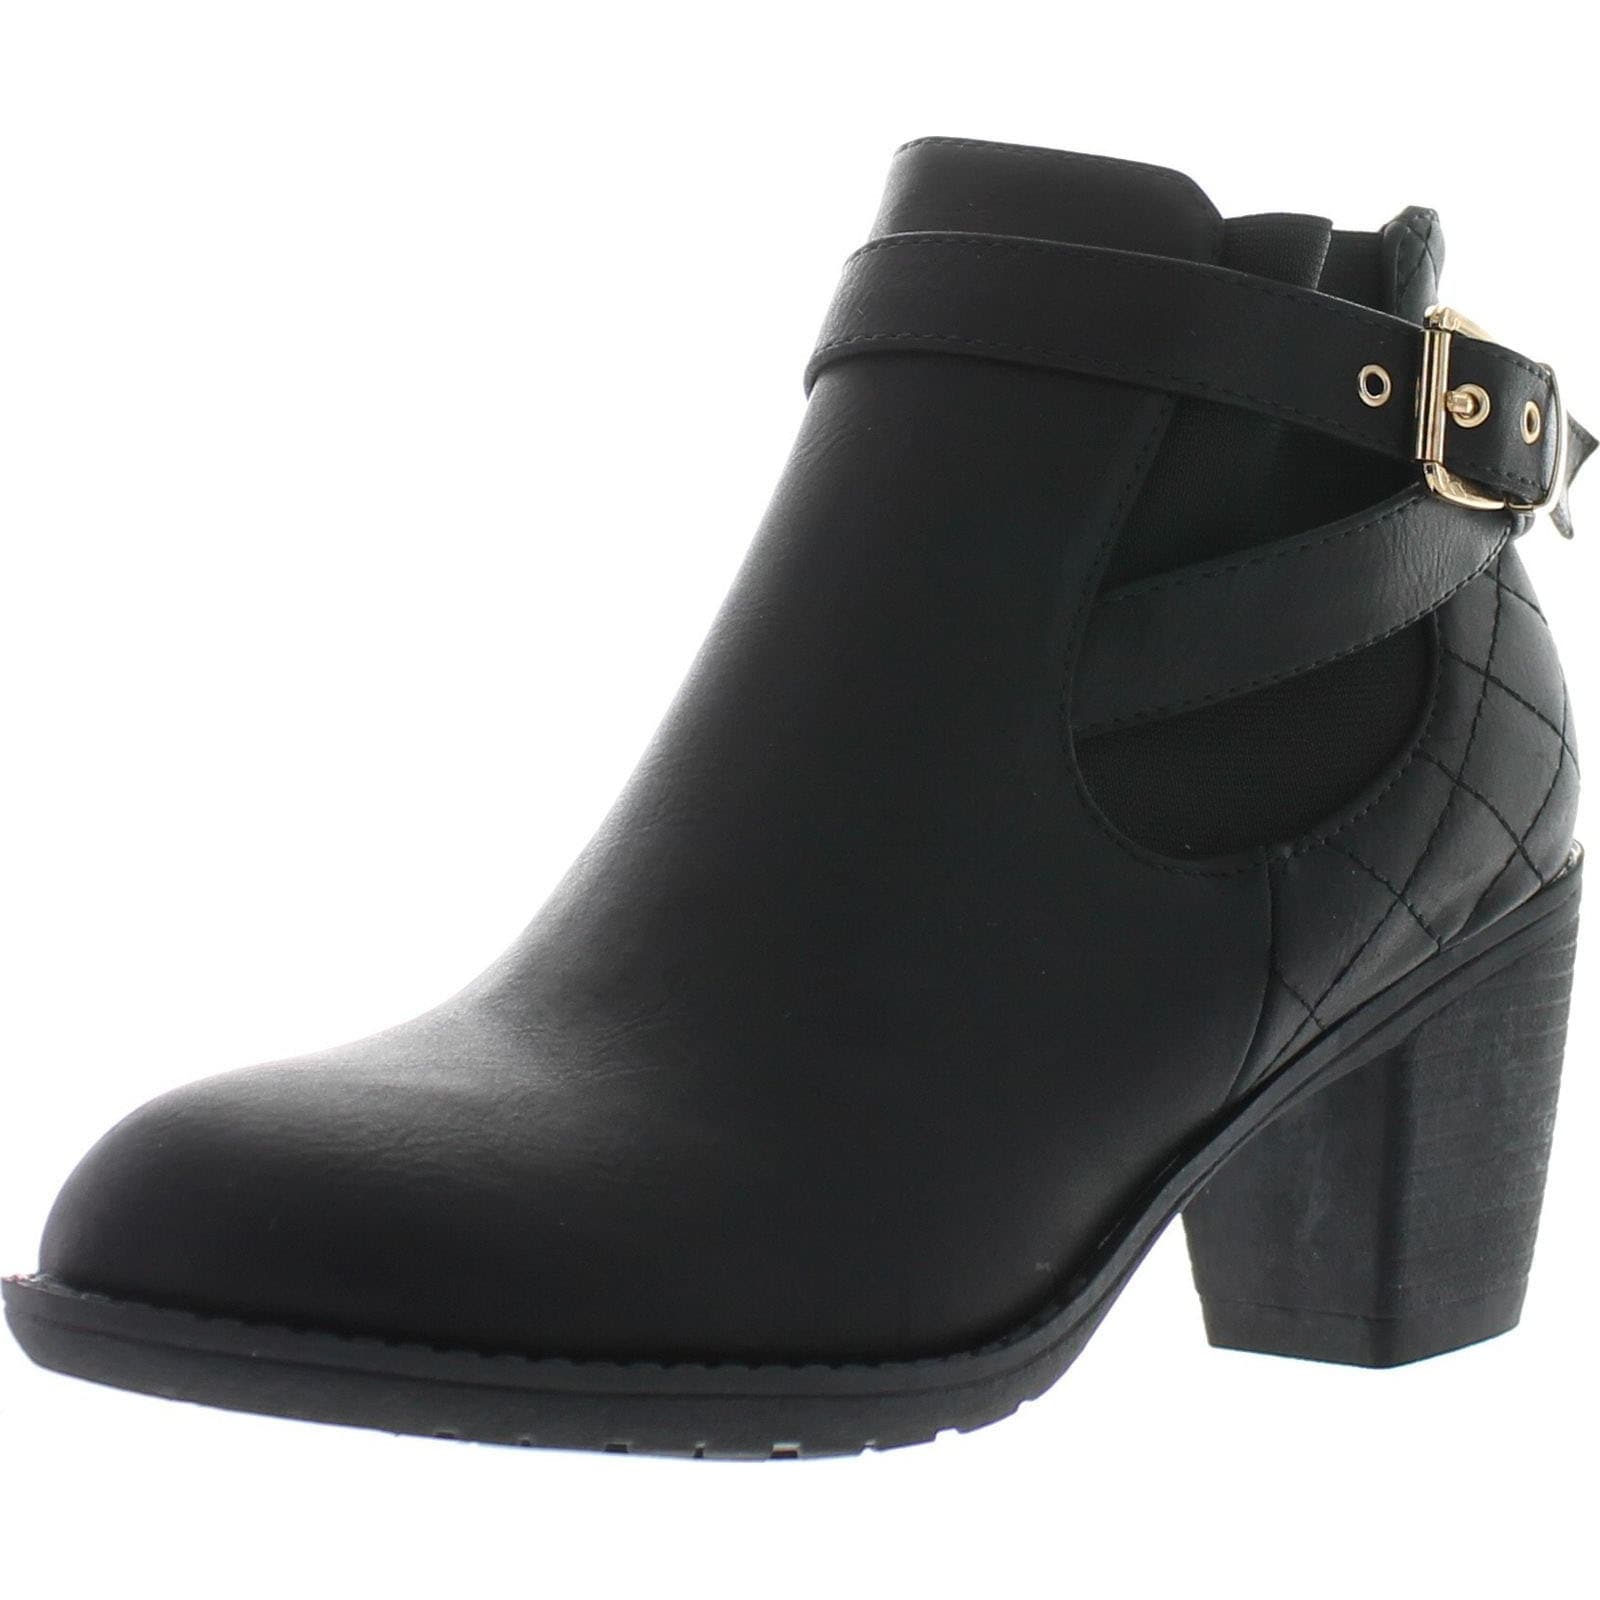 rubber sole heel boots